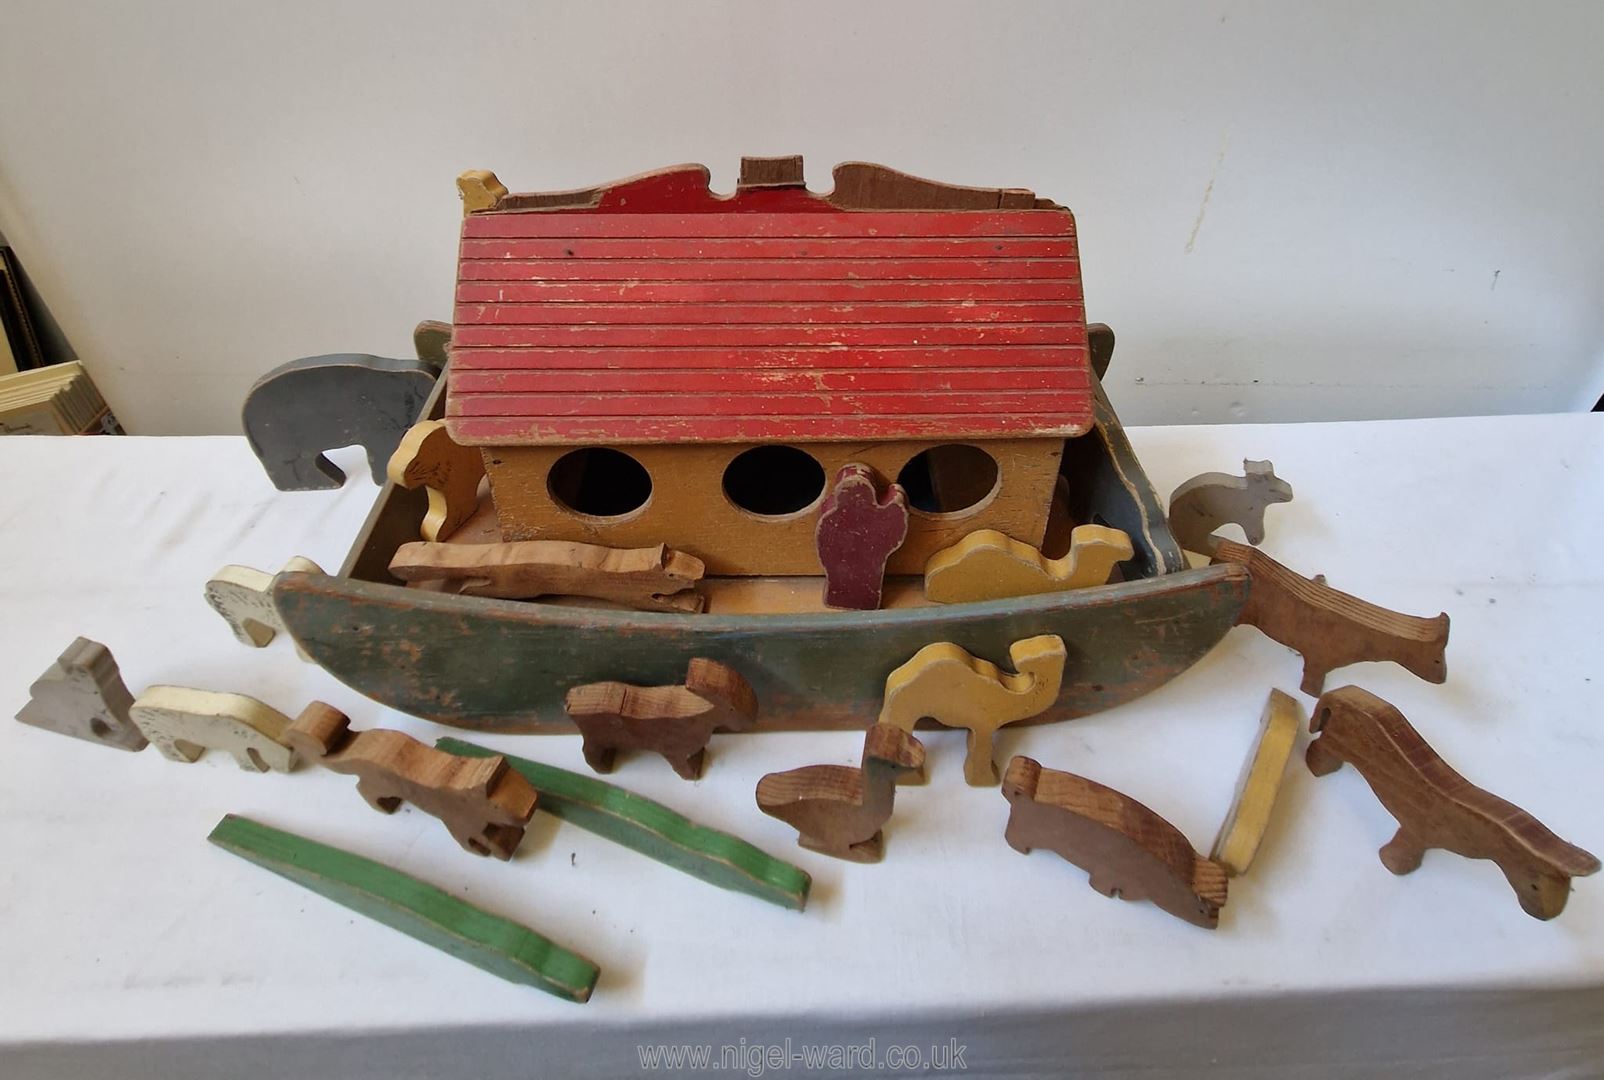 Tiger Toys of Petersfield: An early vintage wooden toy Noah’s Ark with 24 animals; - Image 3 of 6